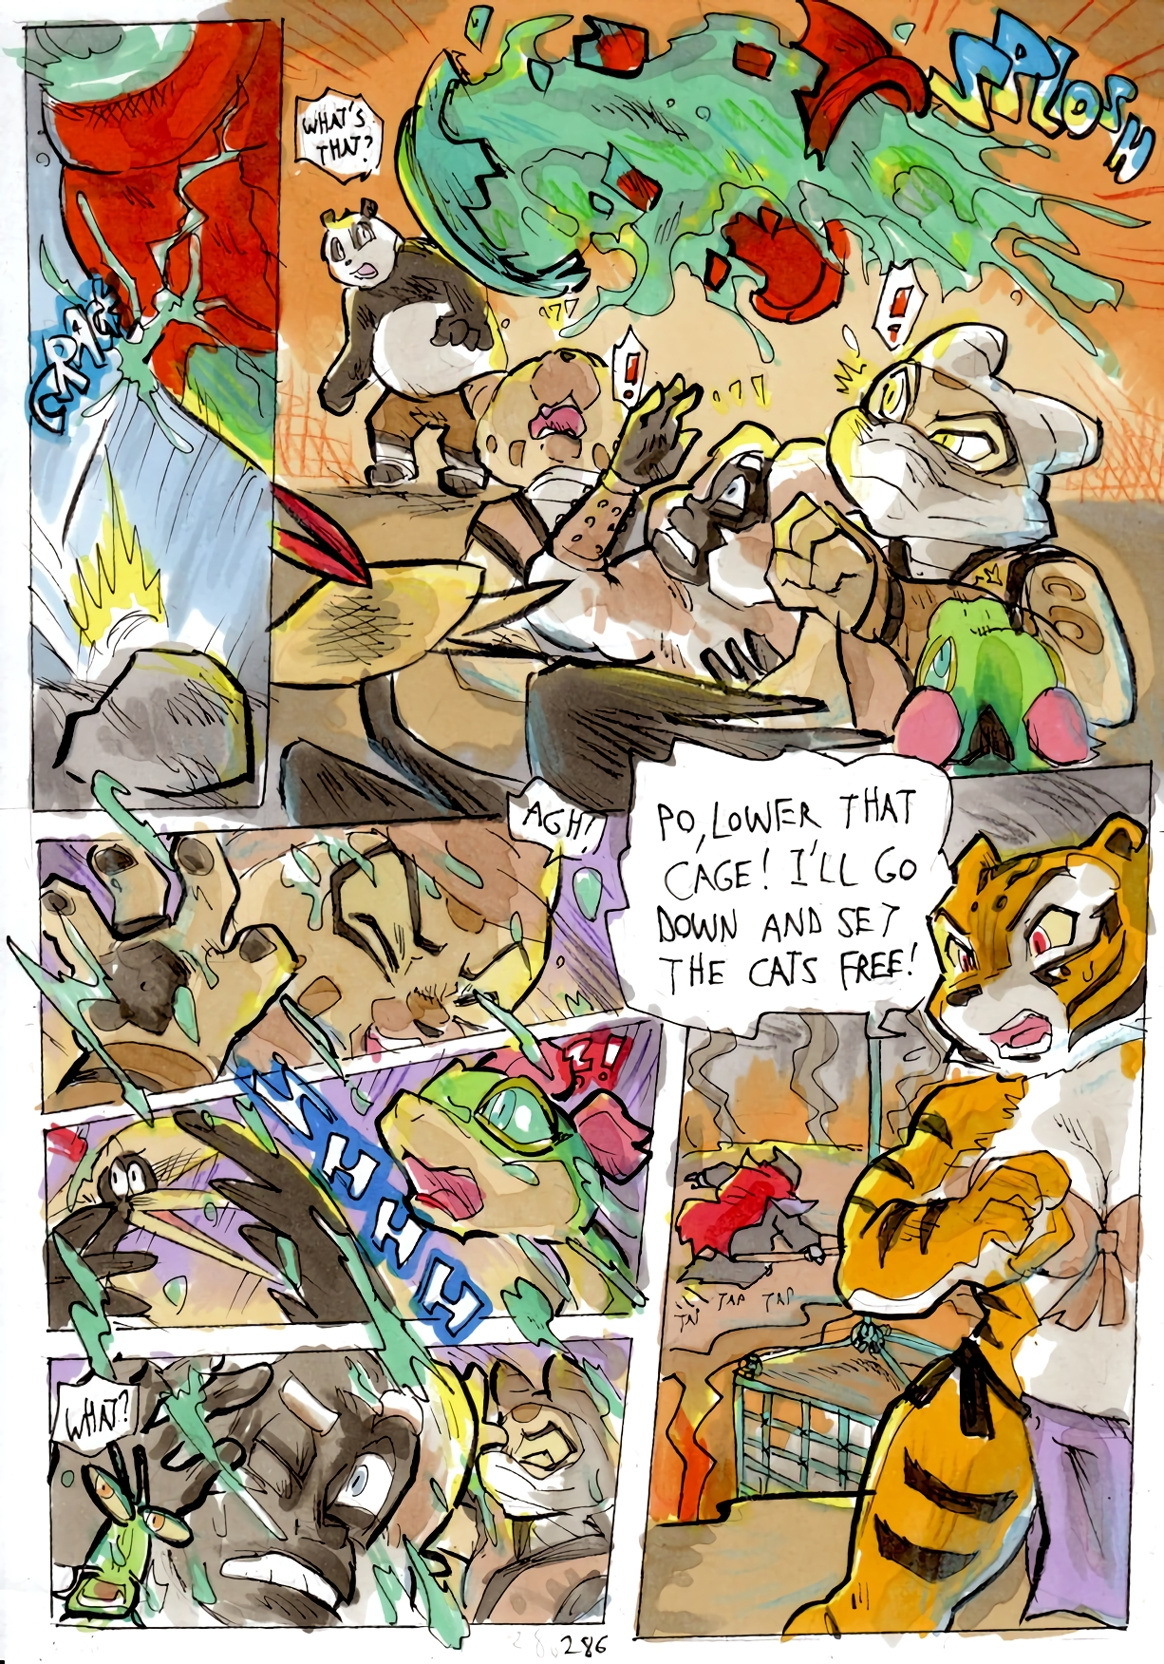 Better Late than Never 2 - Page 141